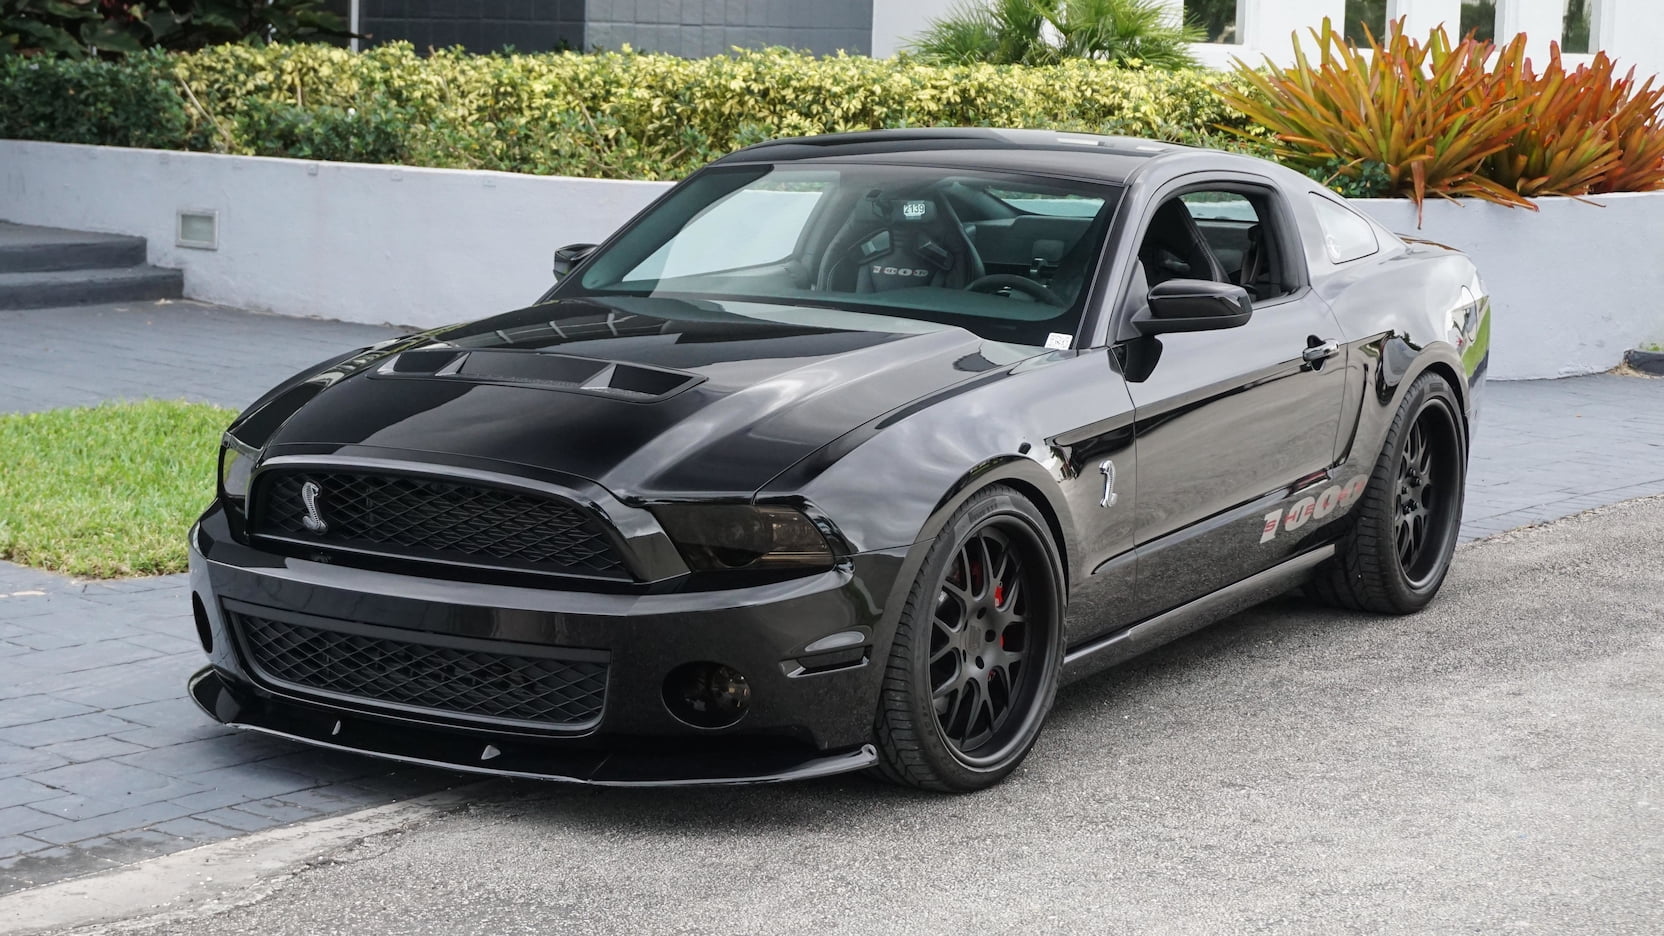 Mustang Of The Day: 2012 Shelby 1000